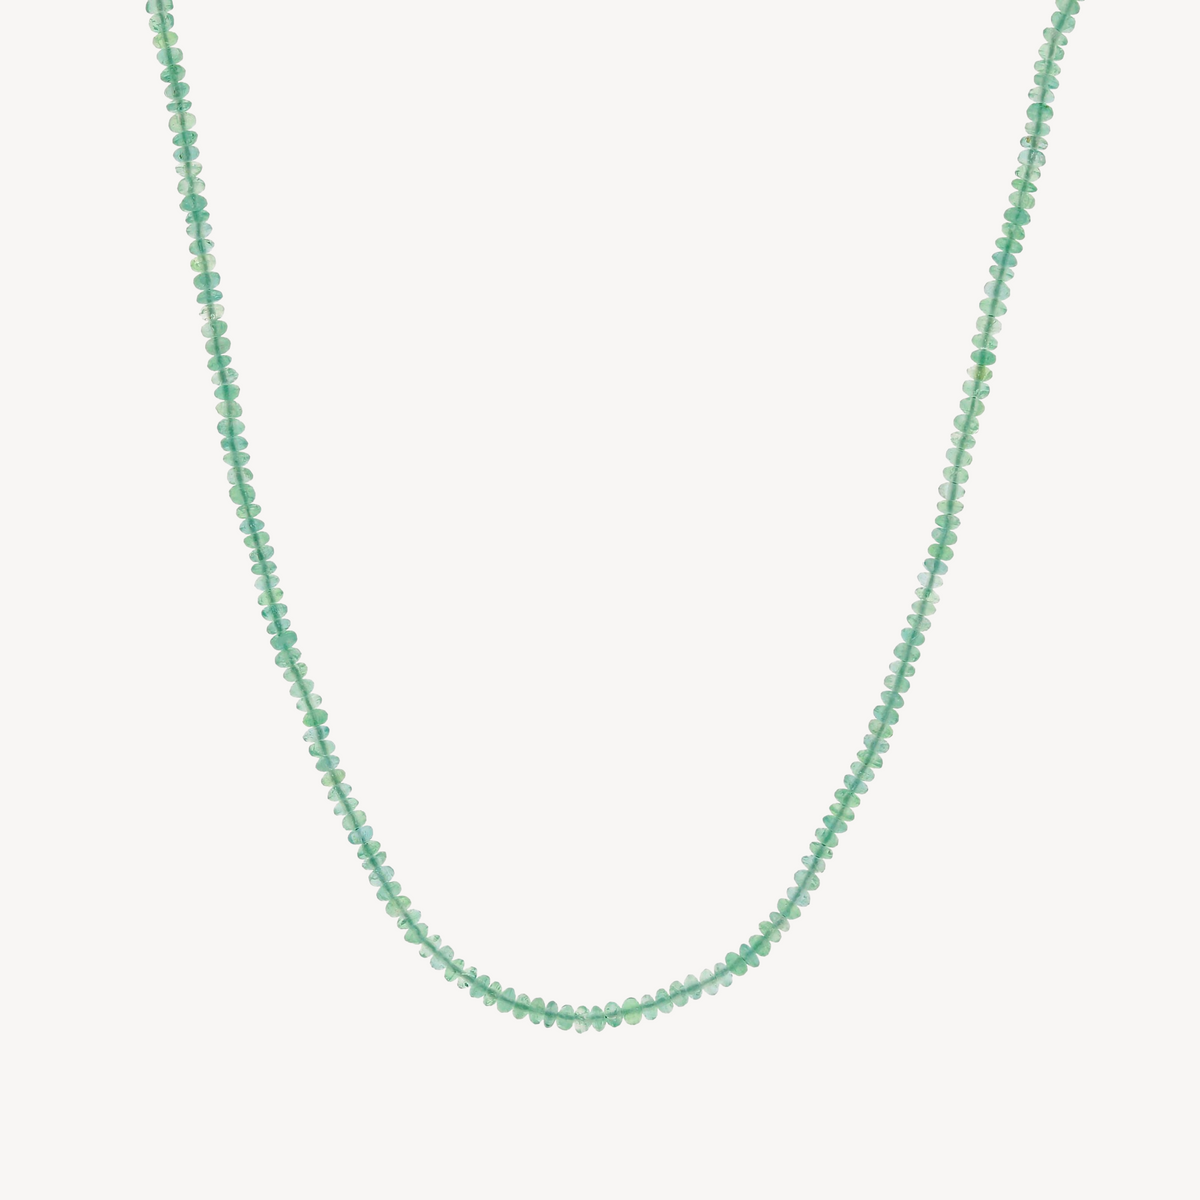 Small Emerald Bead Necklace